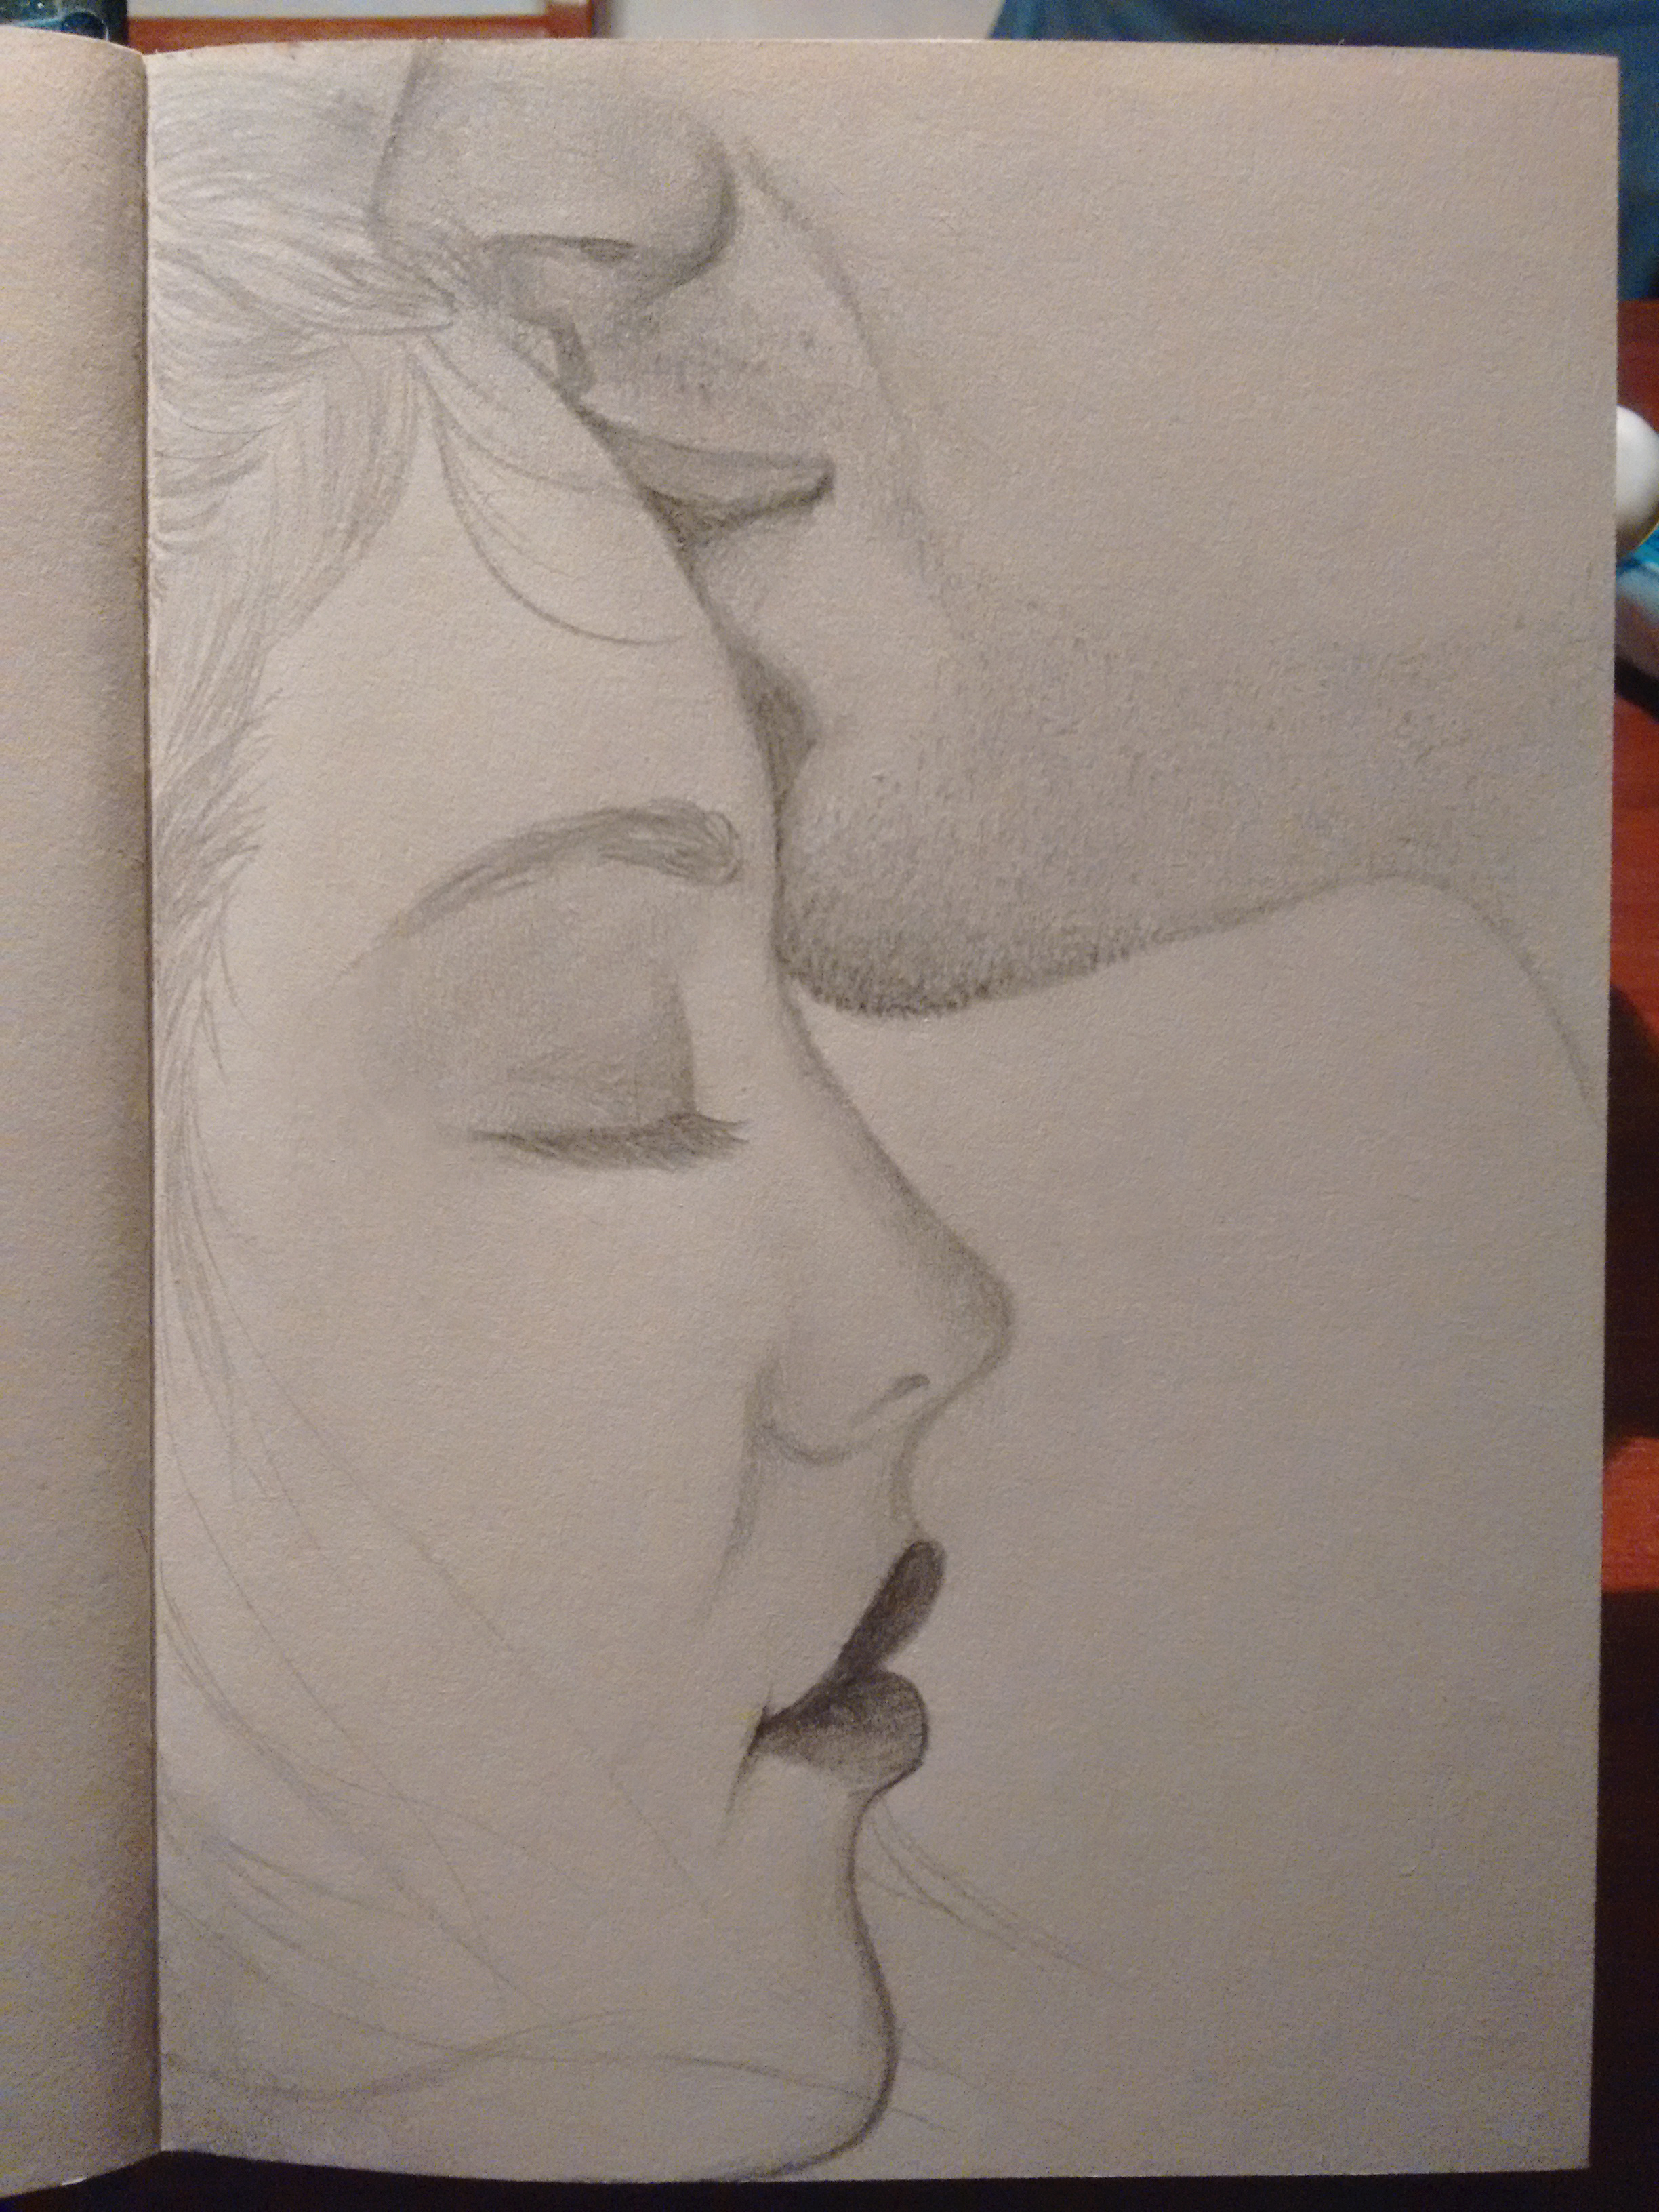 Forehead Kiss Sketch at PaintingValley.com | Explore ...